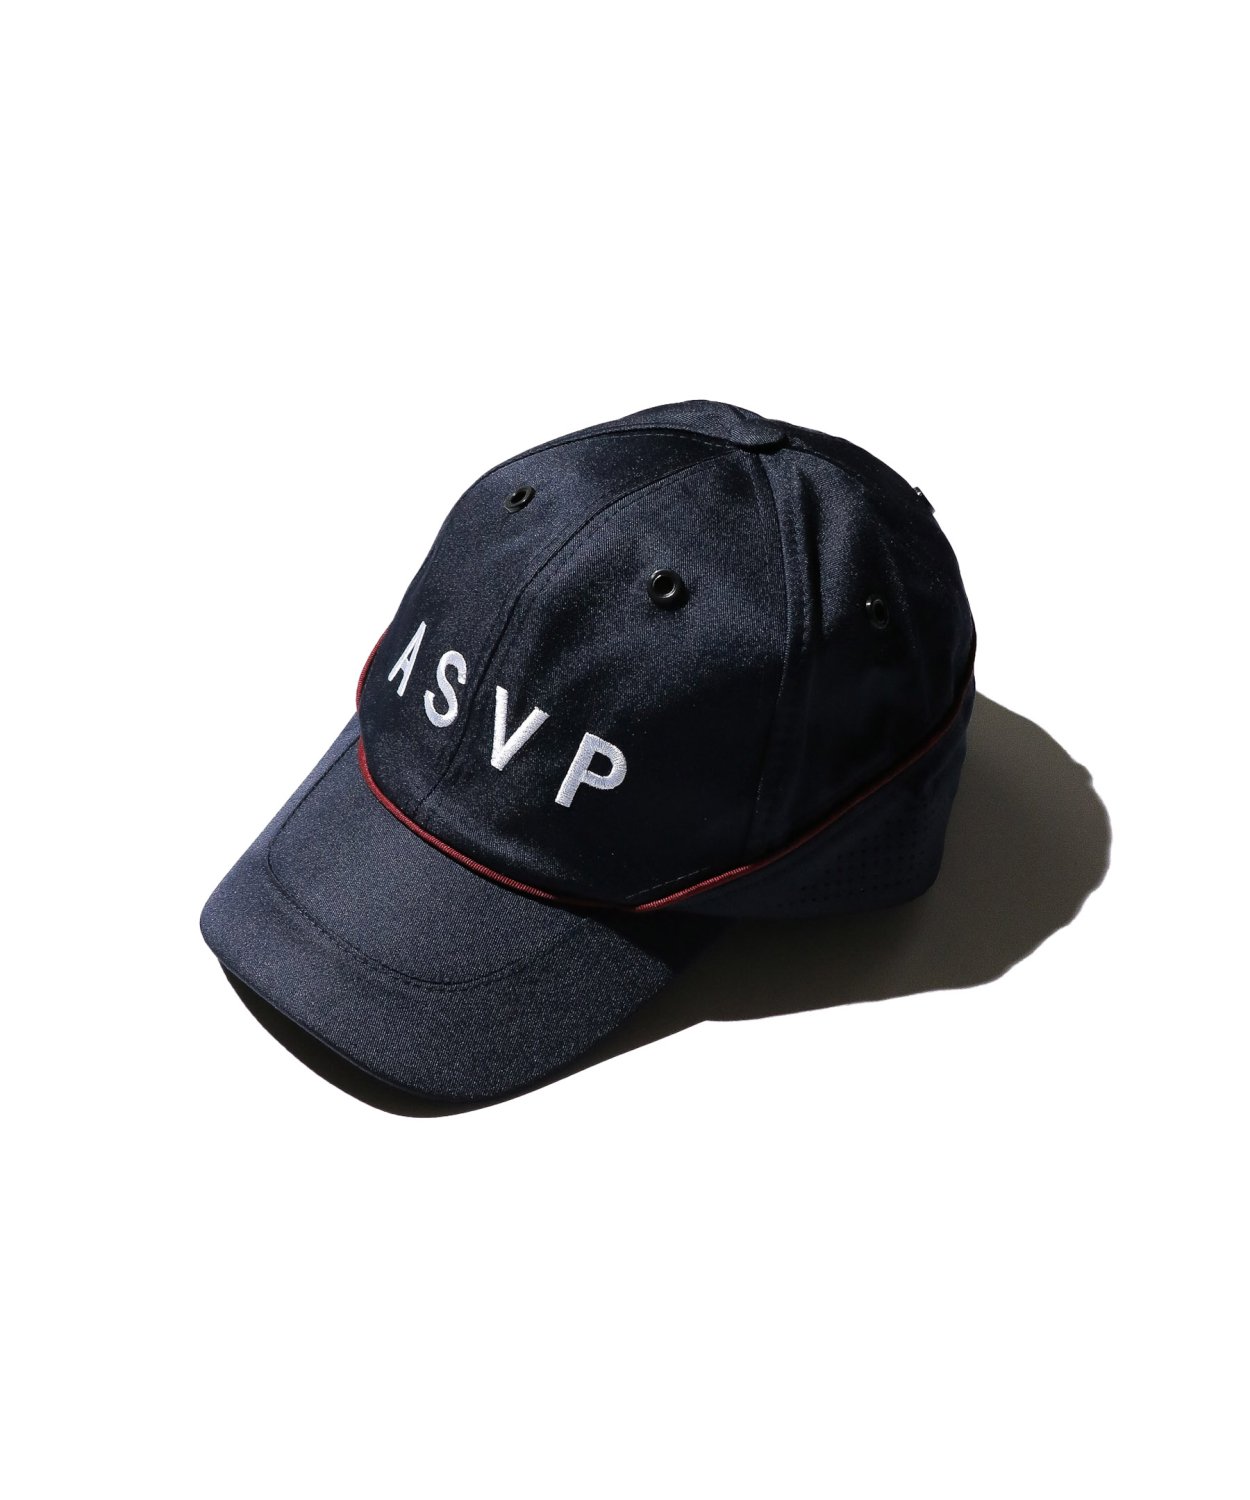 FRENCH MILITARY / FRENCH POLICE ASVP CAP